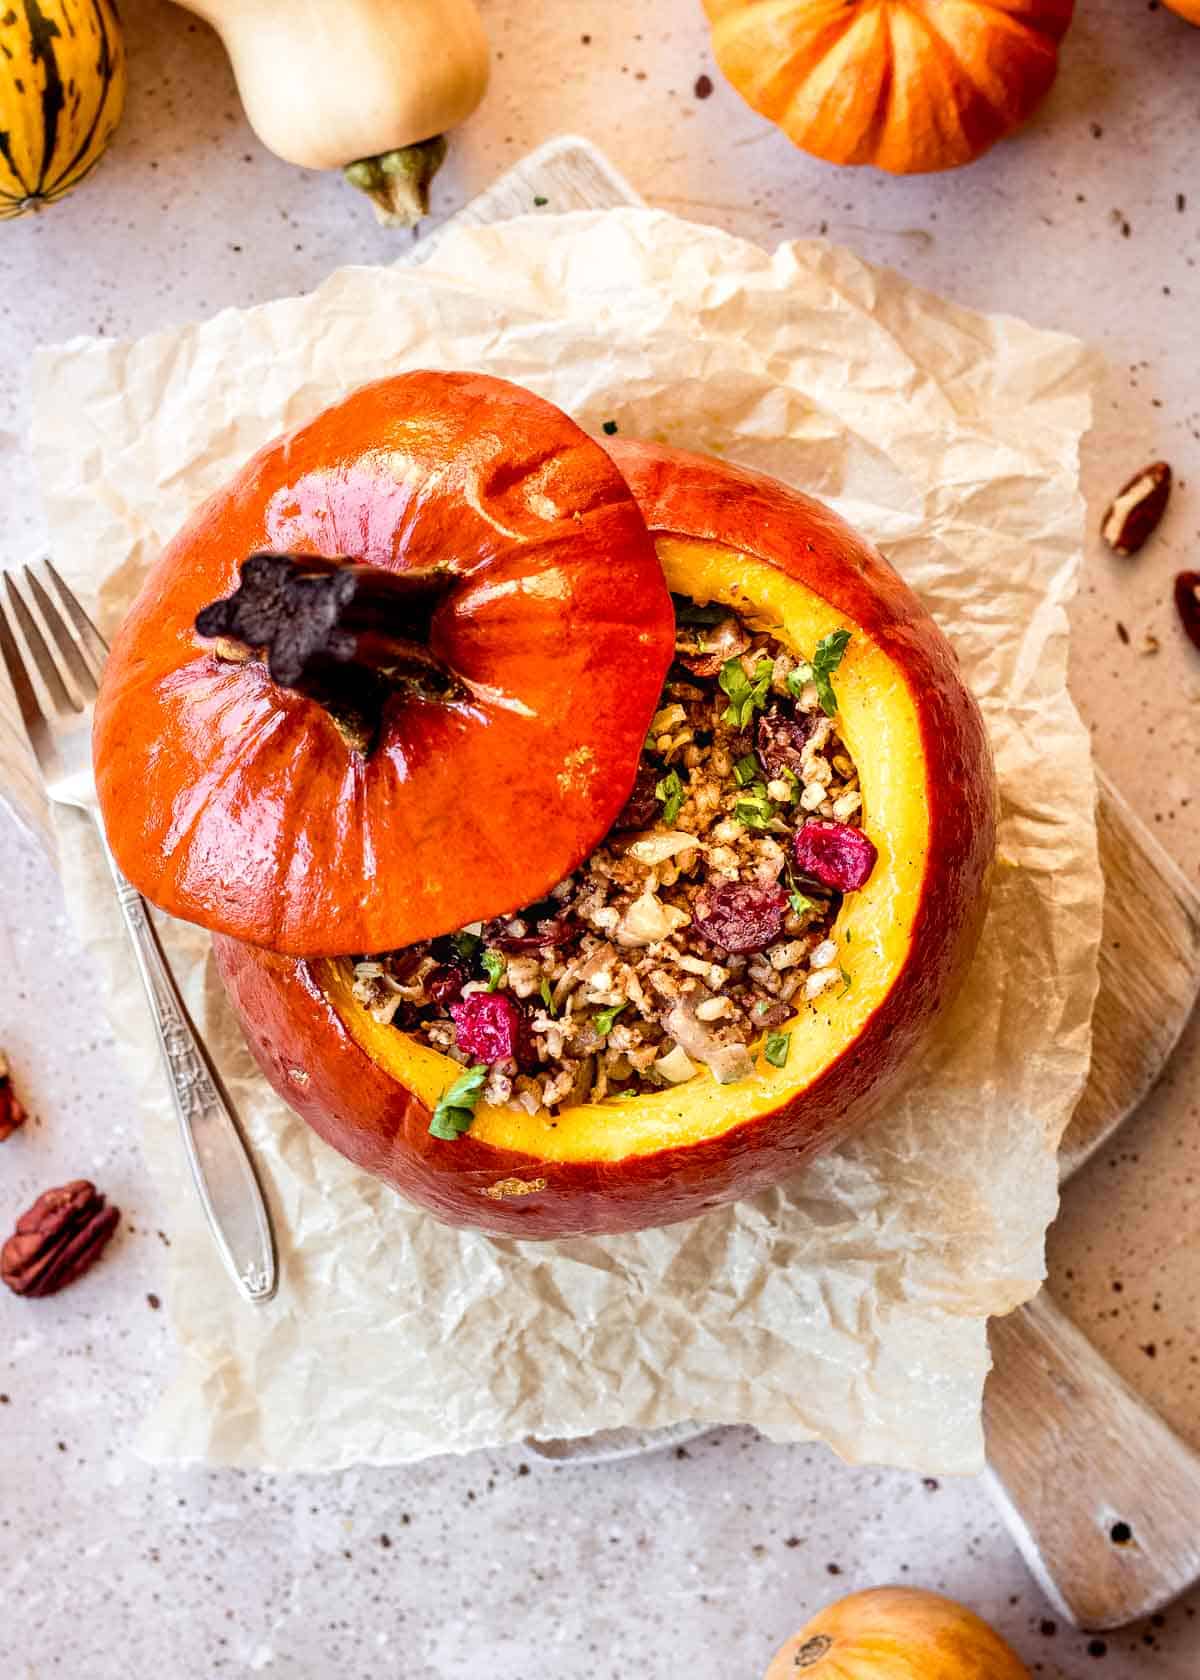 Vegan pumpkin stuffed with rice, pecans and cranberries sits on parchment paper, with it's lid on top, small decorated squash and fork in background.